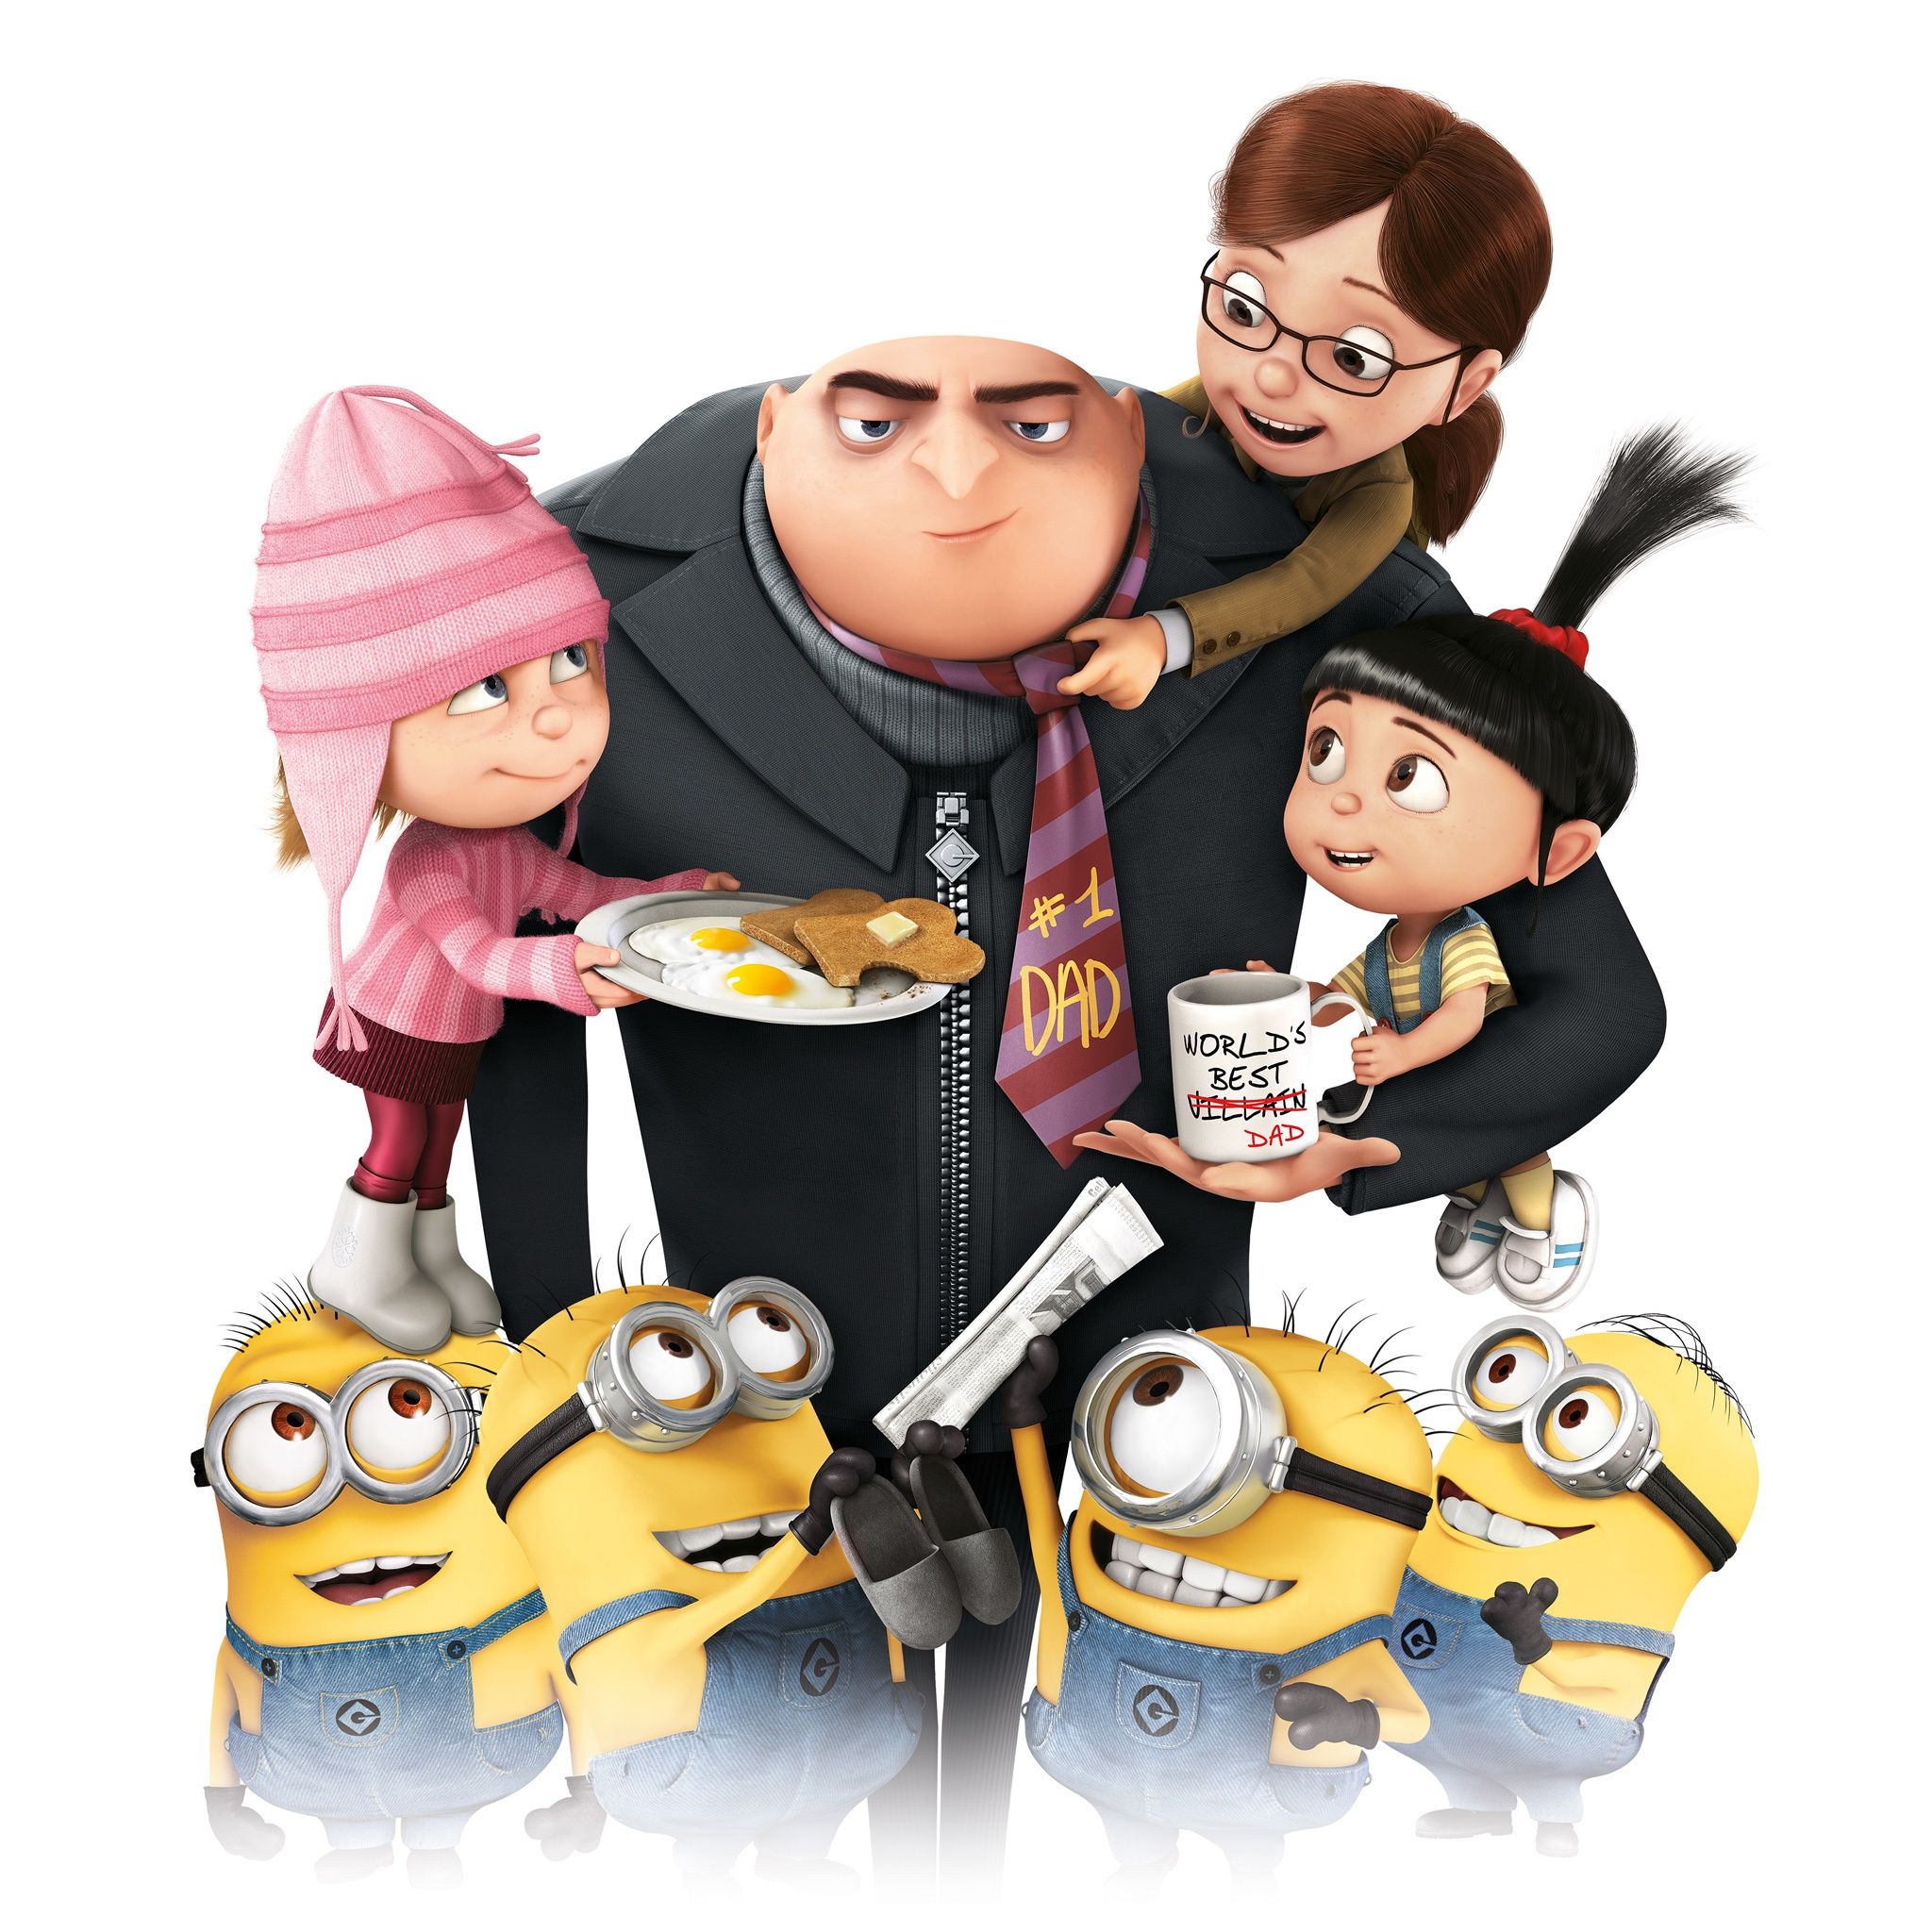 2013 Despicable Me 2 HD Wallpaper - iHD Wallpapers